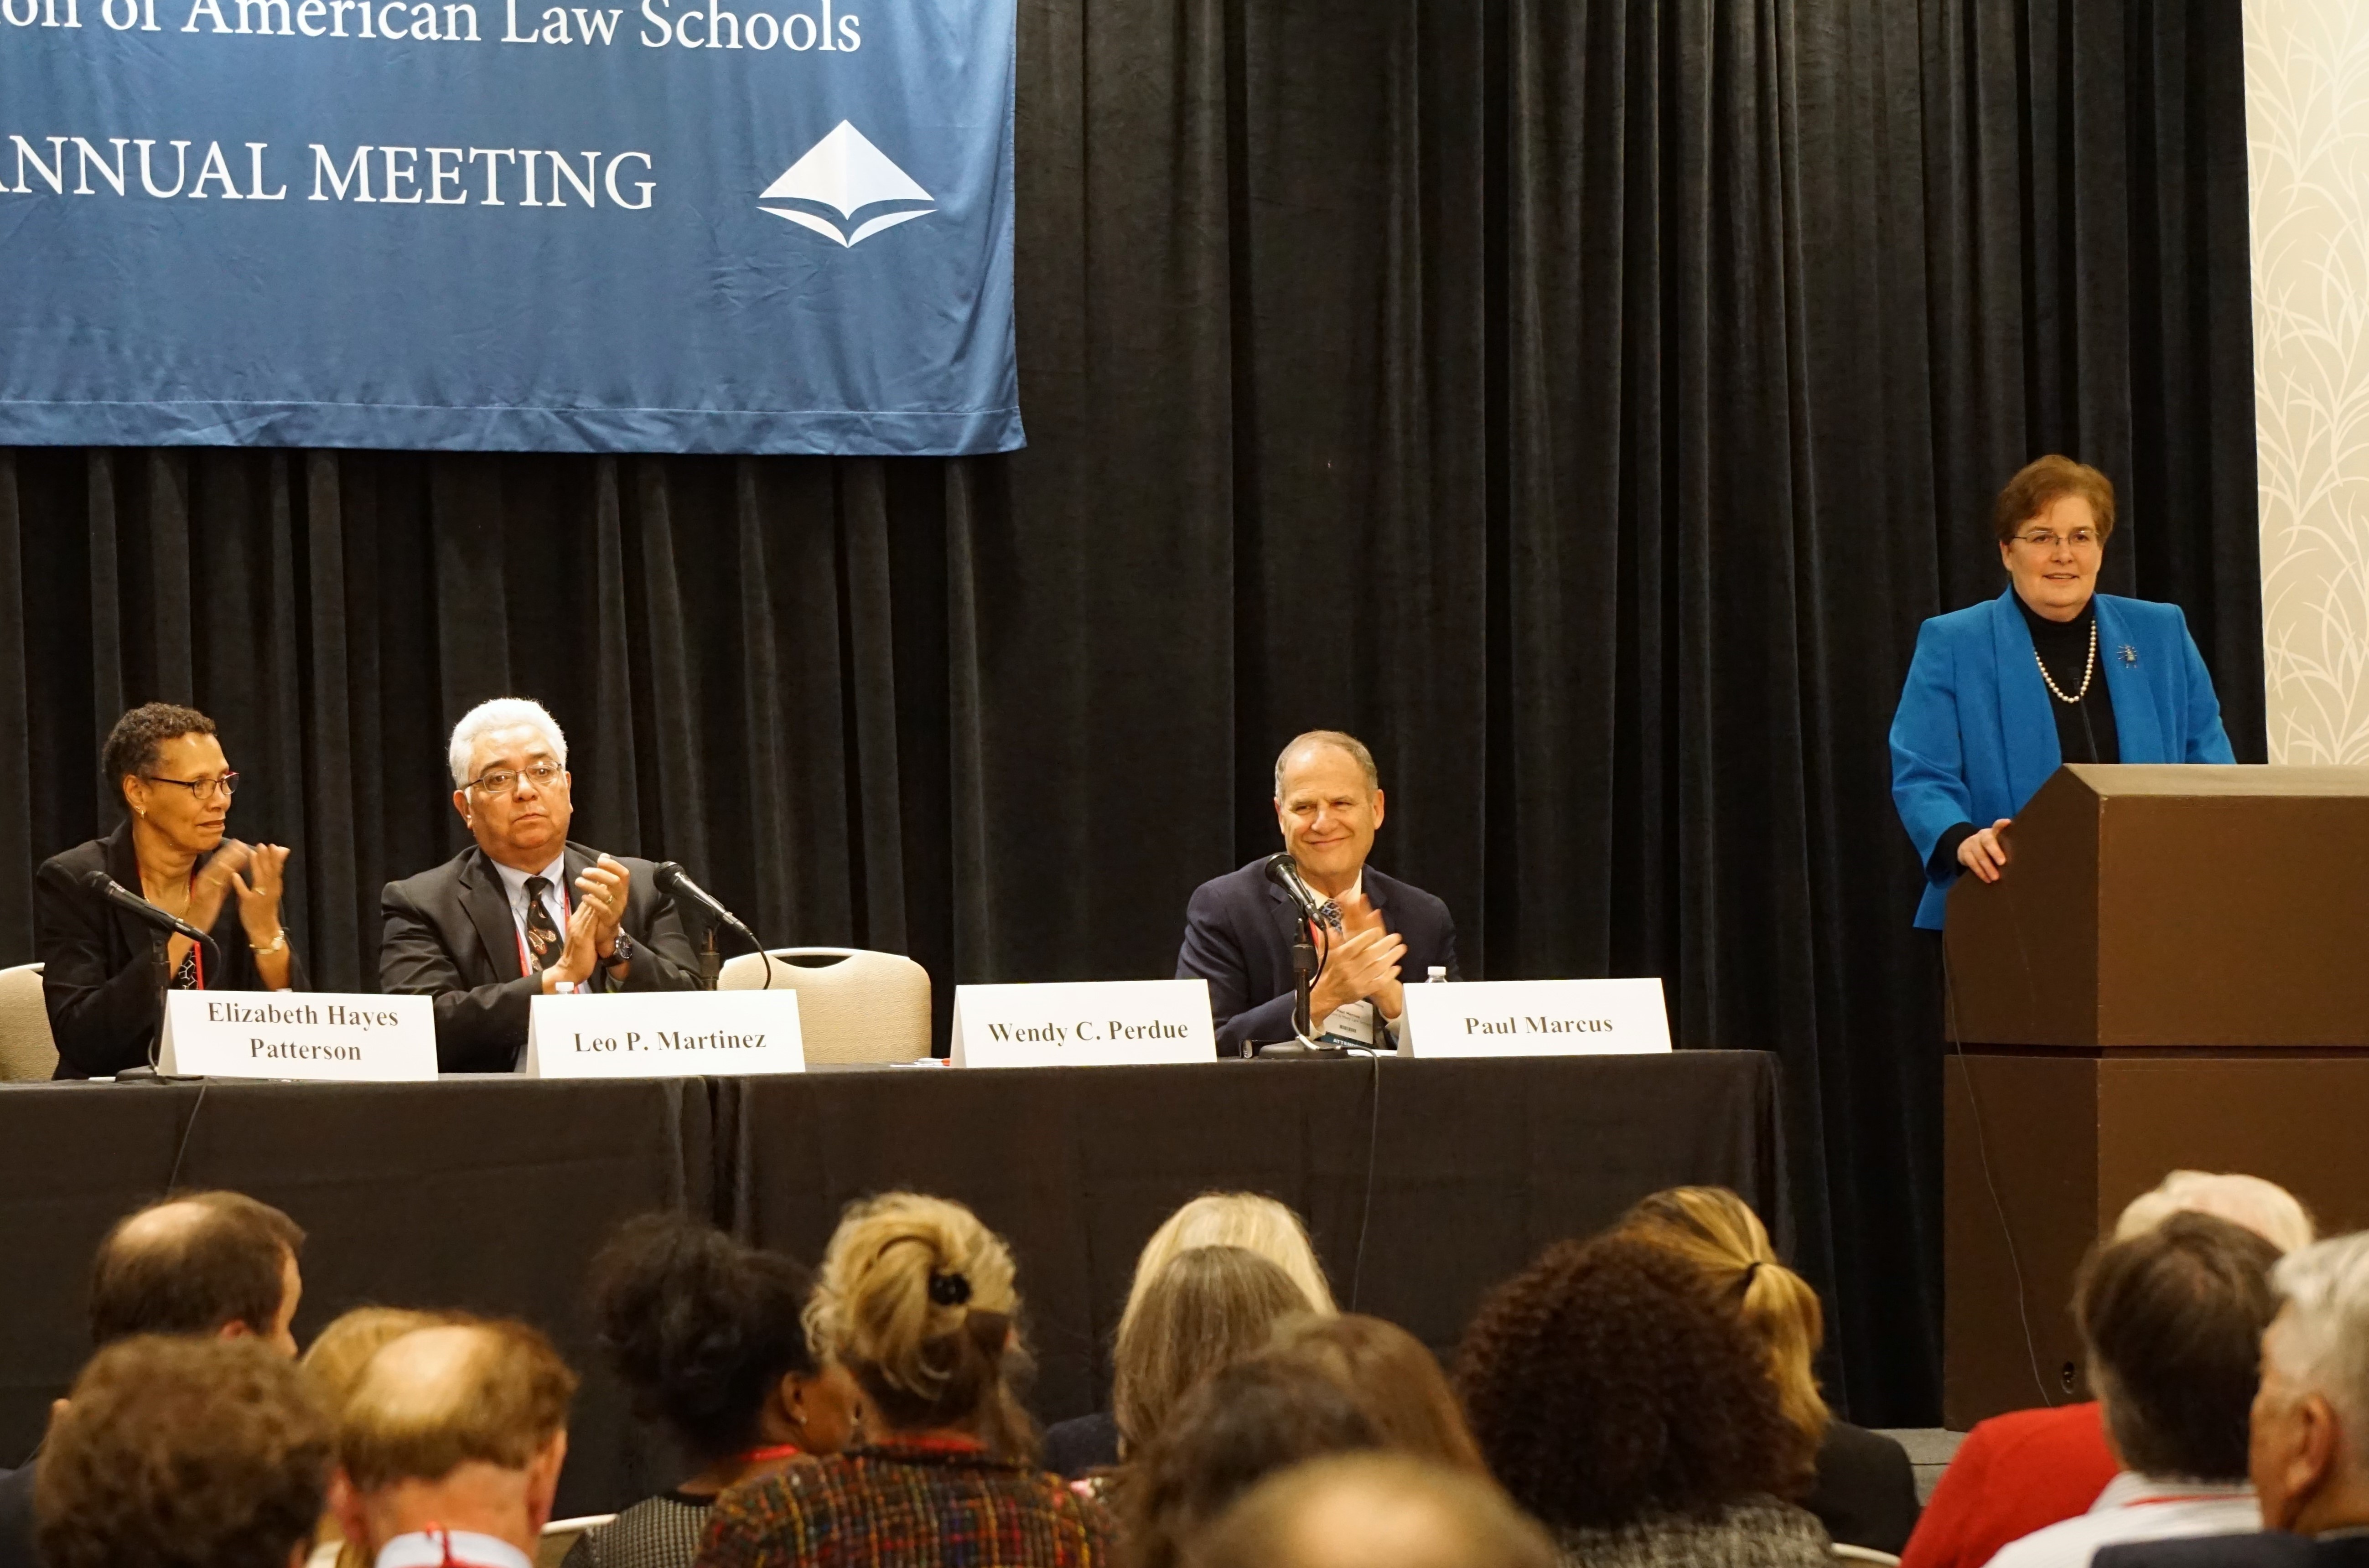 2018 AALS President Wendy Perdue, Dean, University of Richmond School of Law, gave her first address as president at the Second Meeting of the AALS House of Representatives on the theme for AALS 2019, “Building Bridges.”